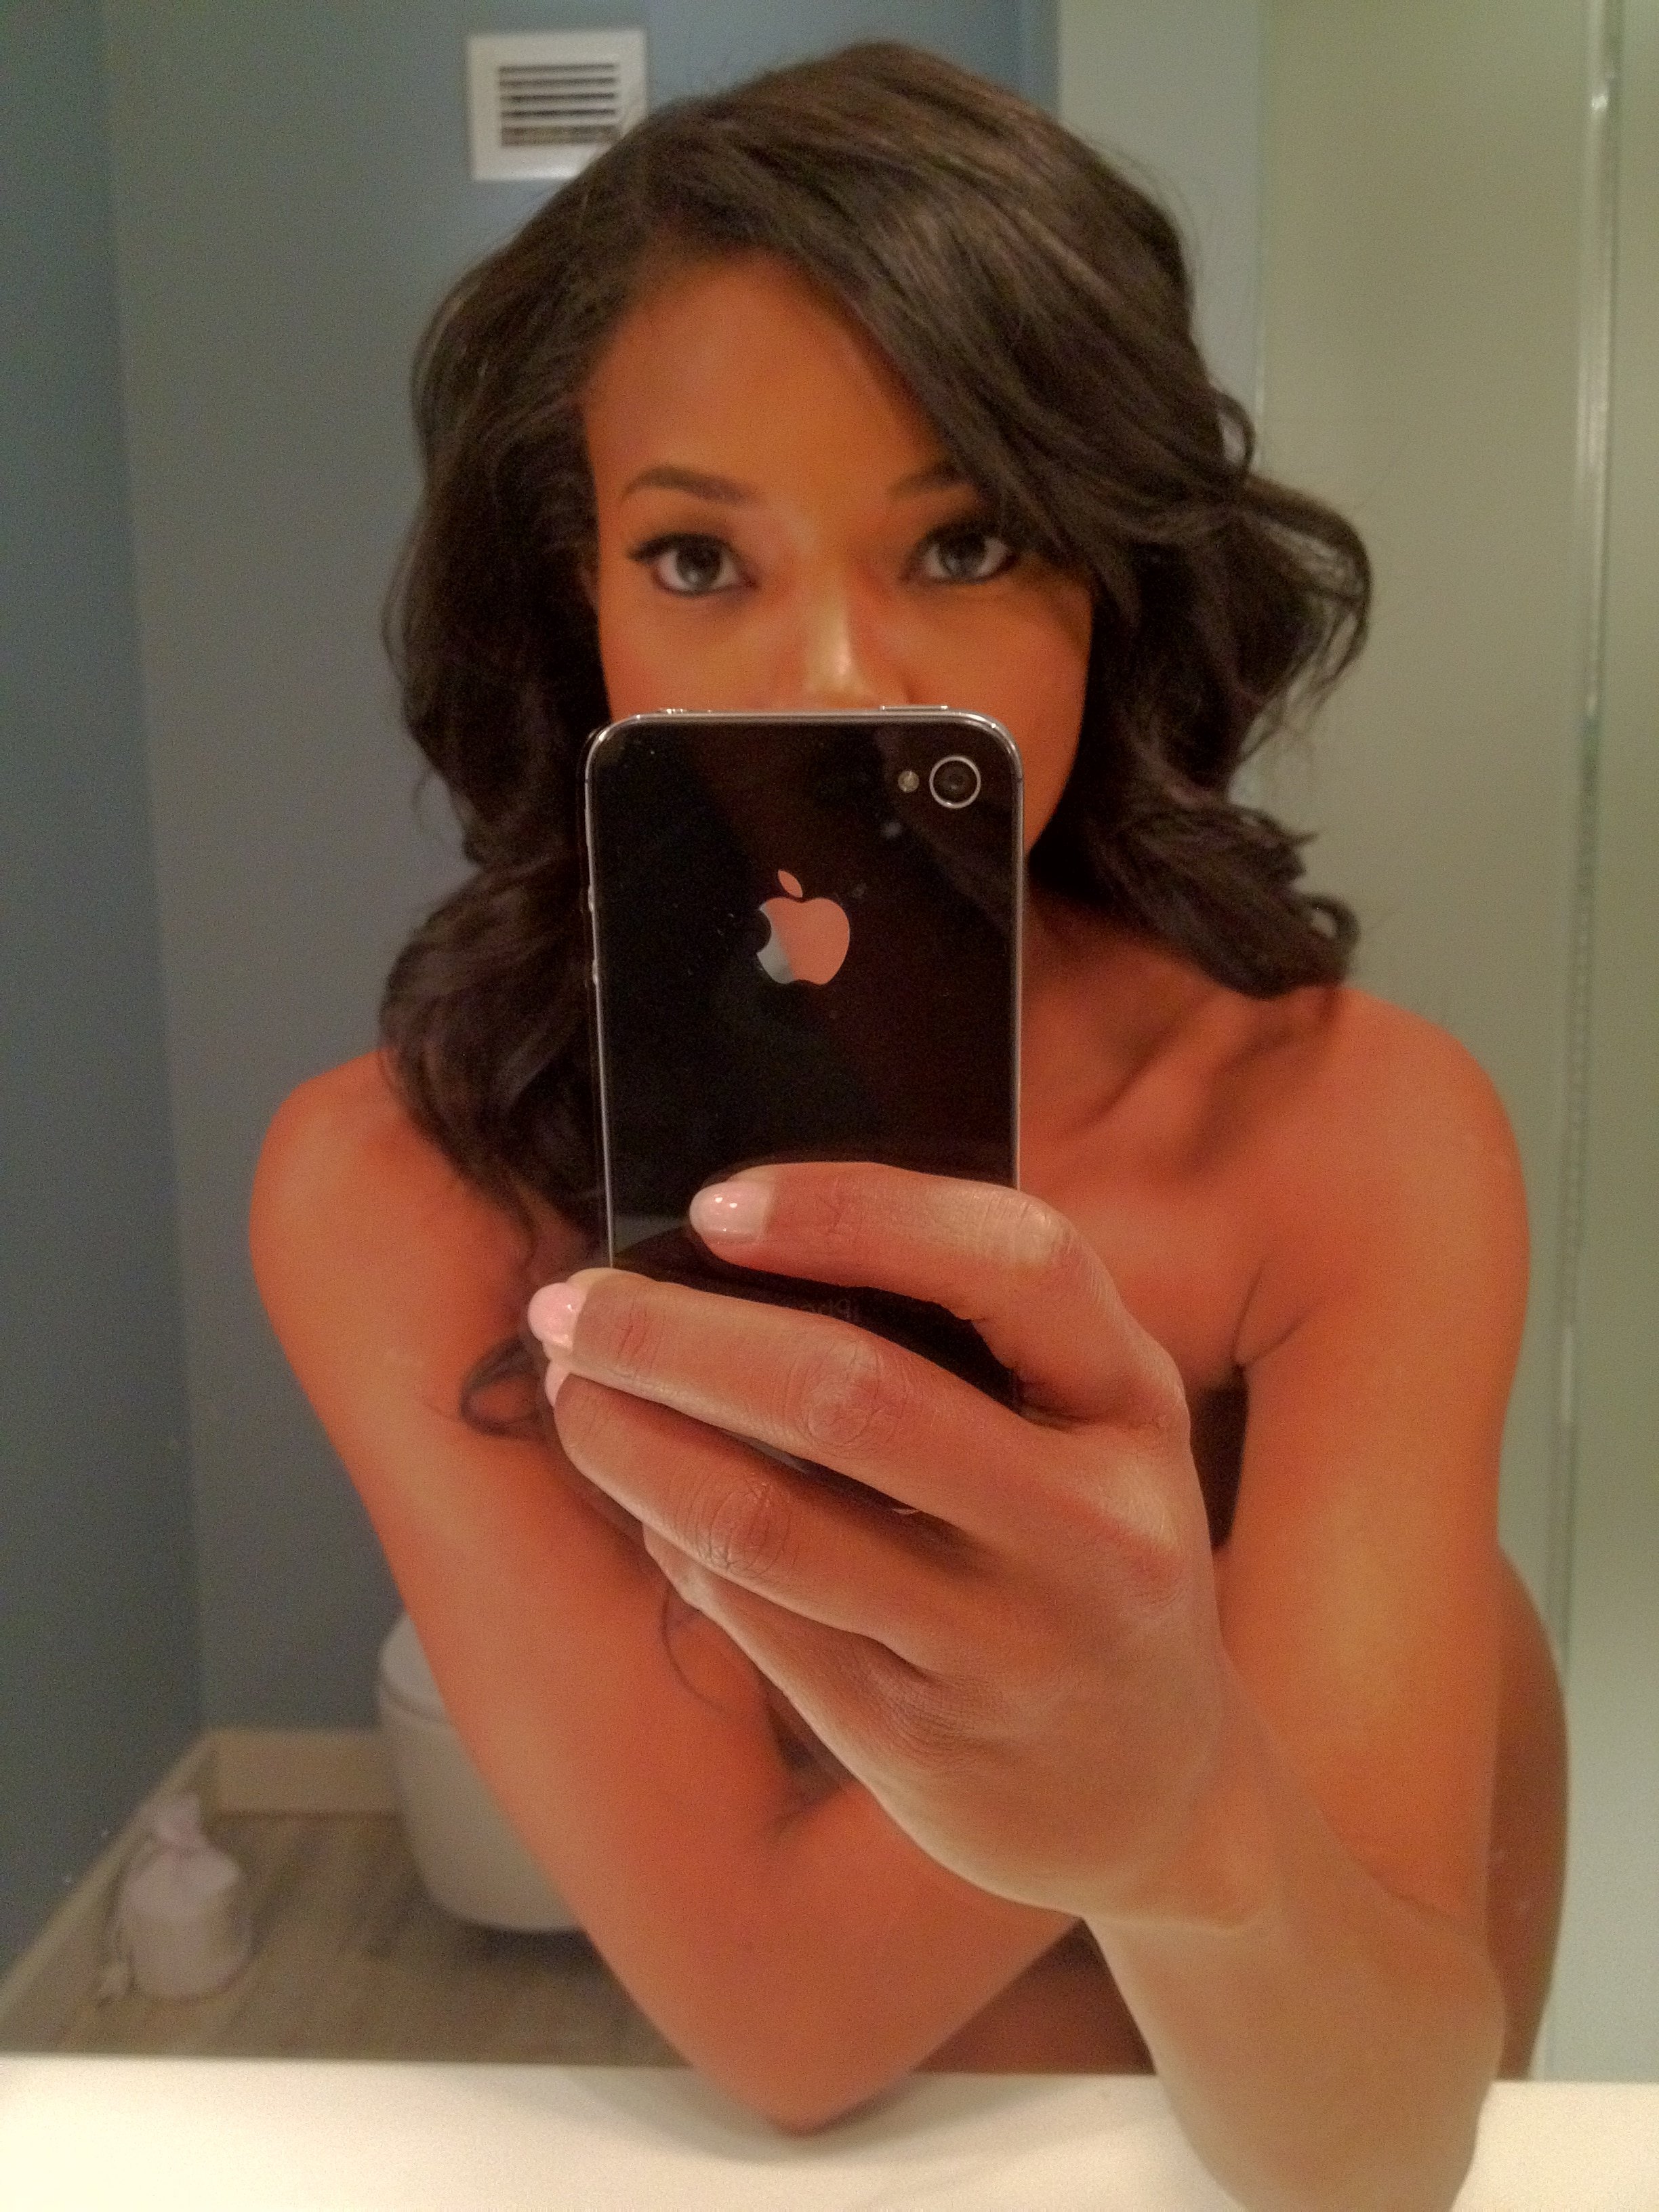 Gabrielle union naked pictures